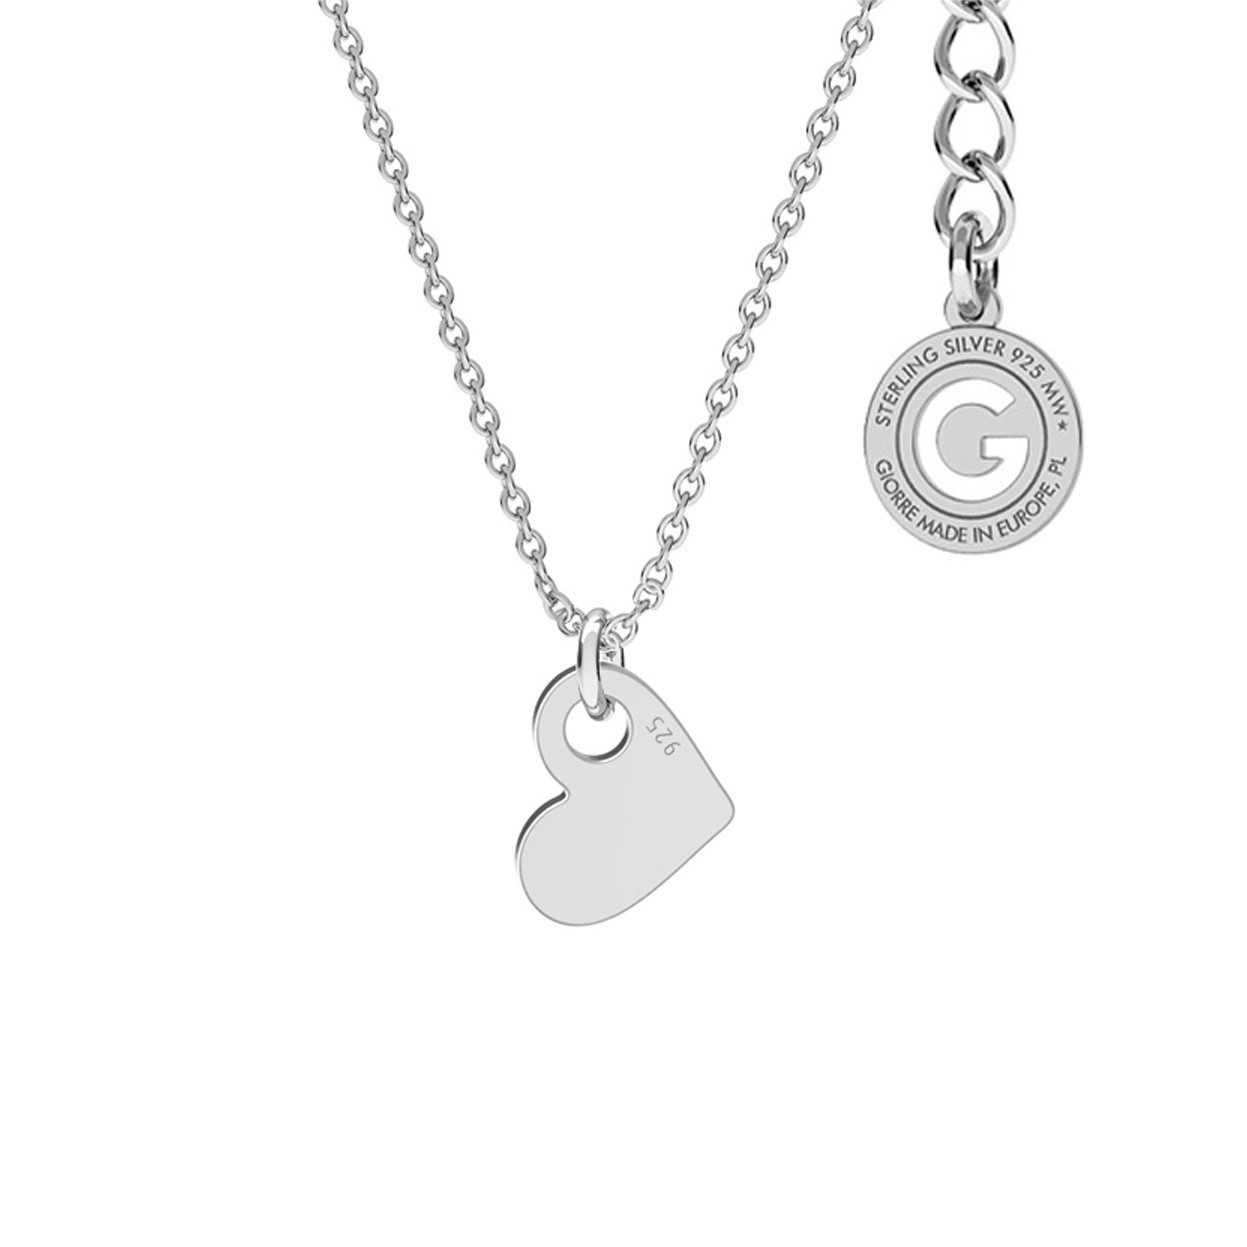 NECKLACE GIRL, HEART ENGRAVEING, STERLING SILVER 925